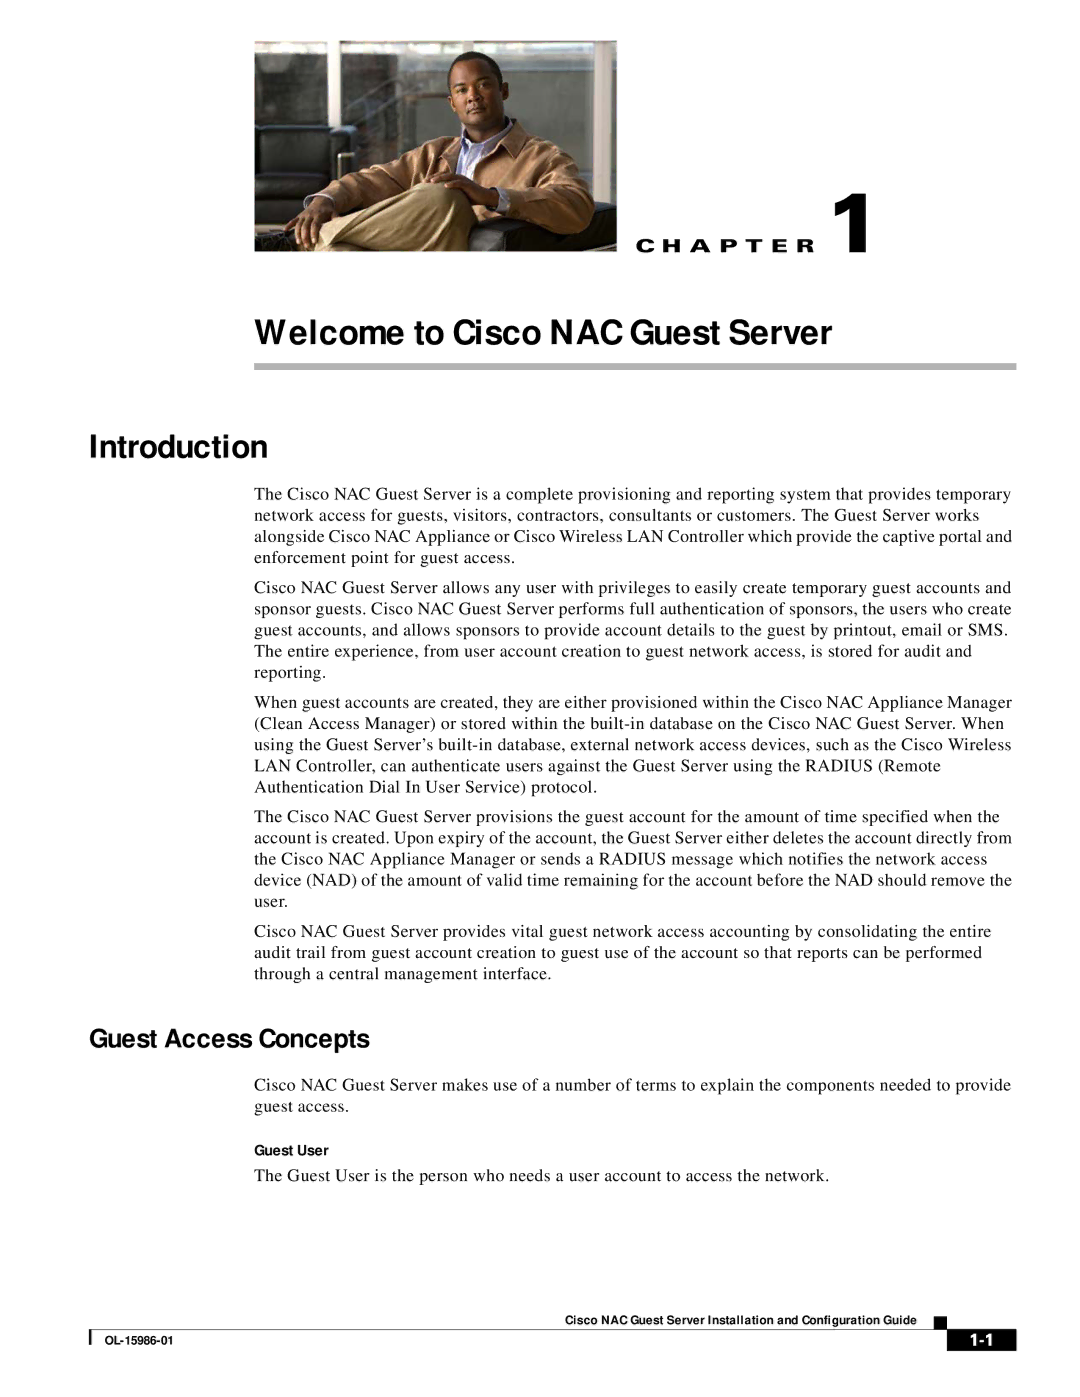 Cisco Systems OL-15986-01 manual Welcome to Cisco NAC Guest Server, Introduction, Guest Access Concepts 